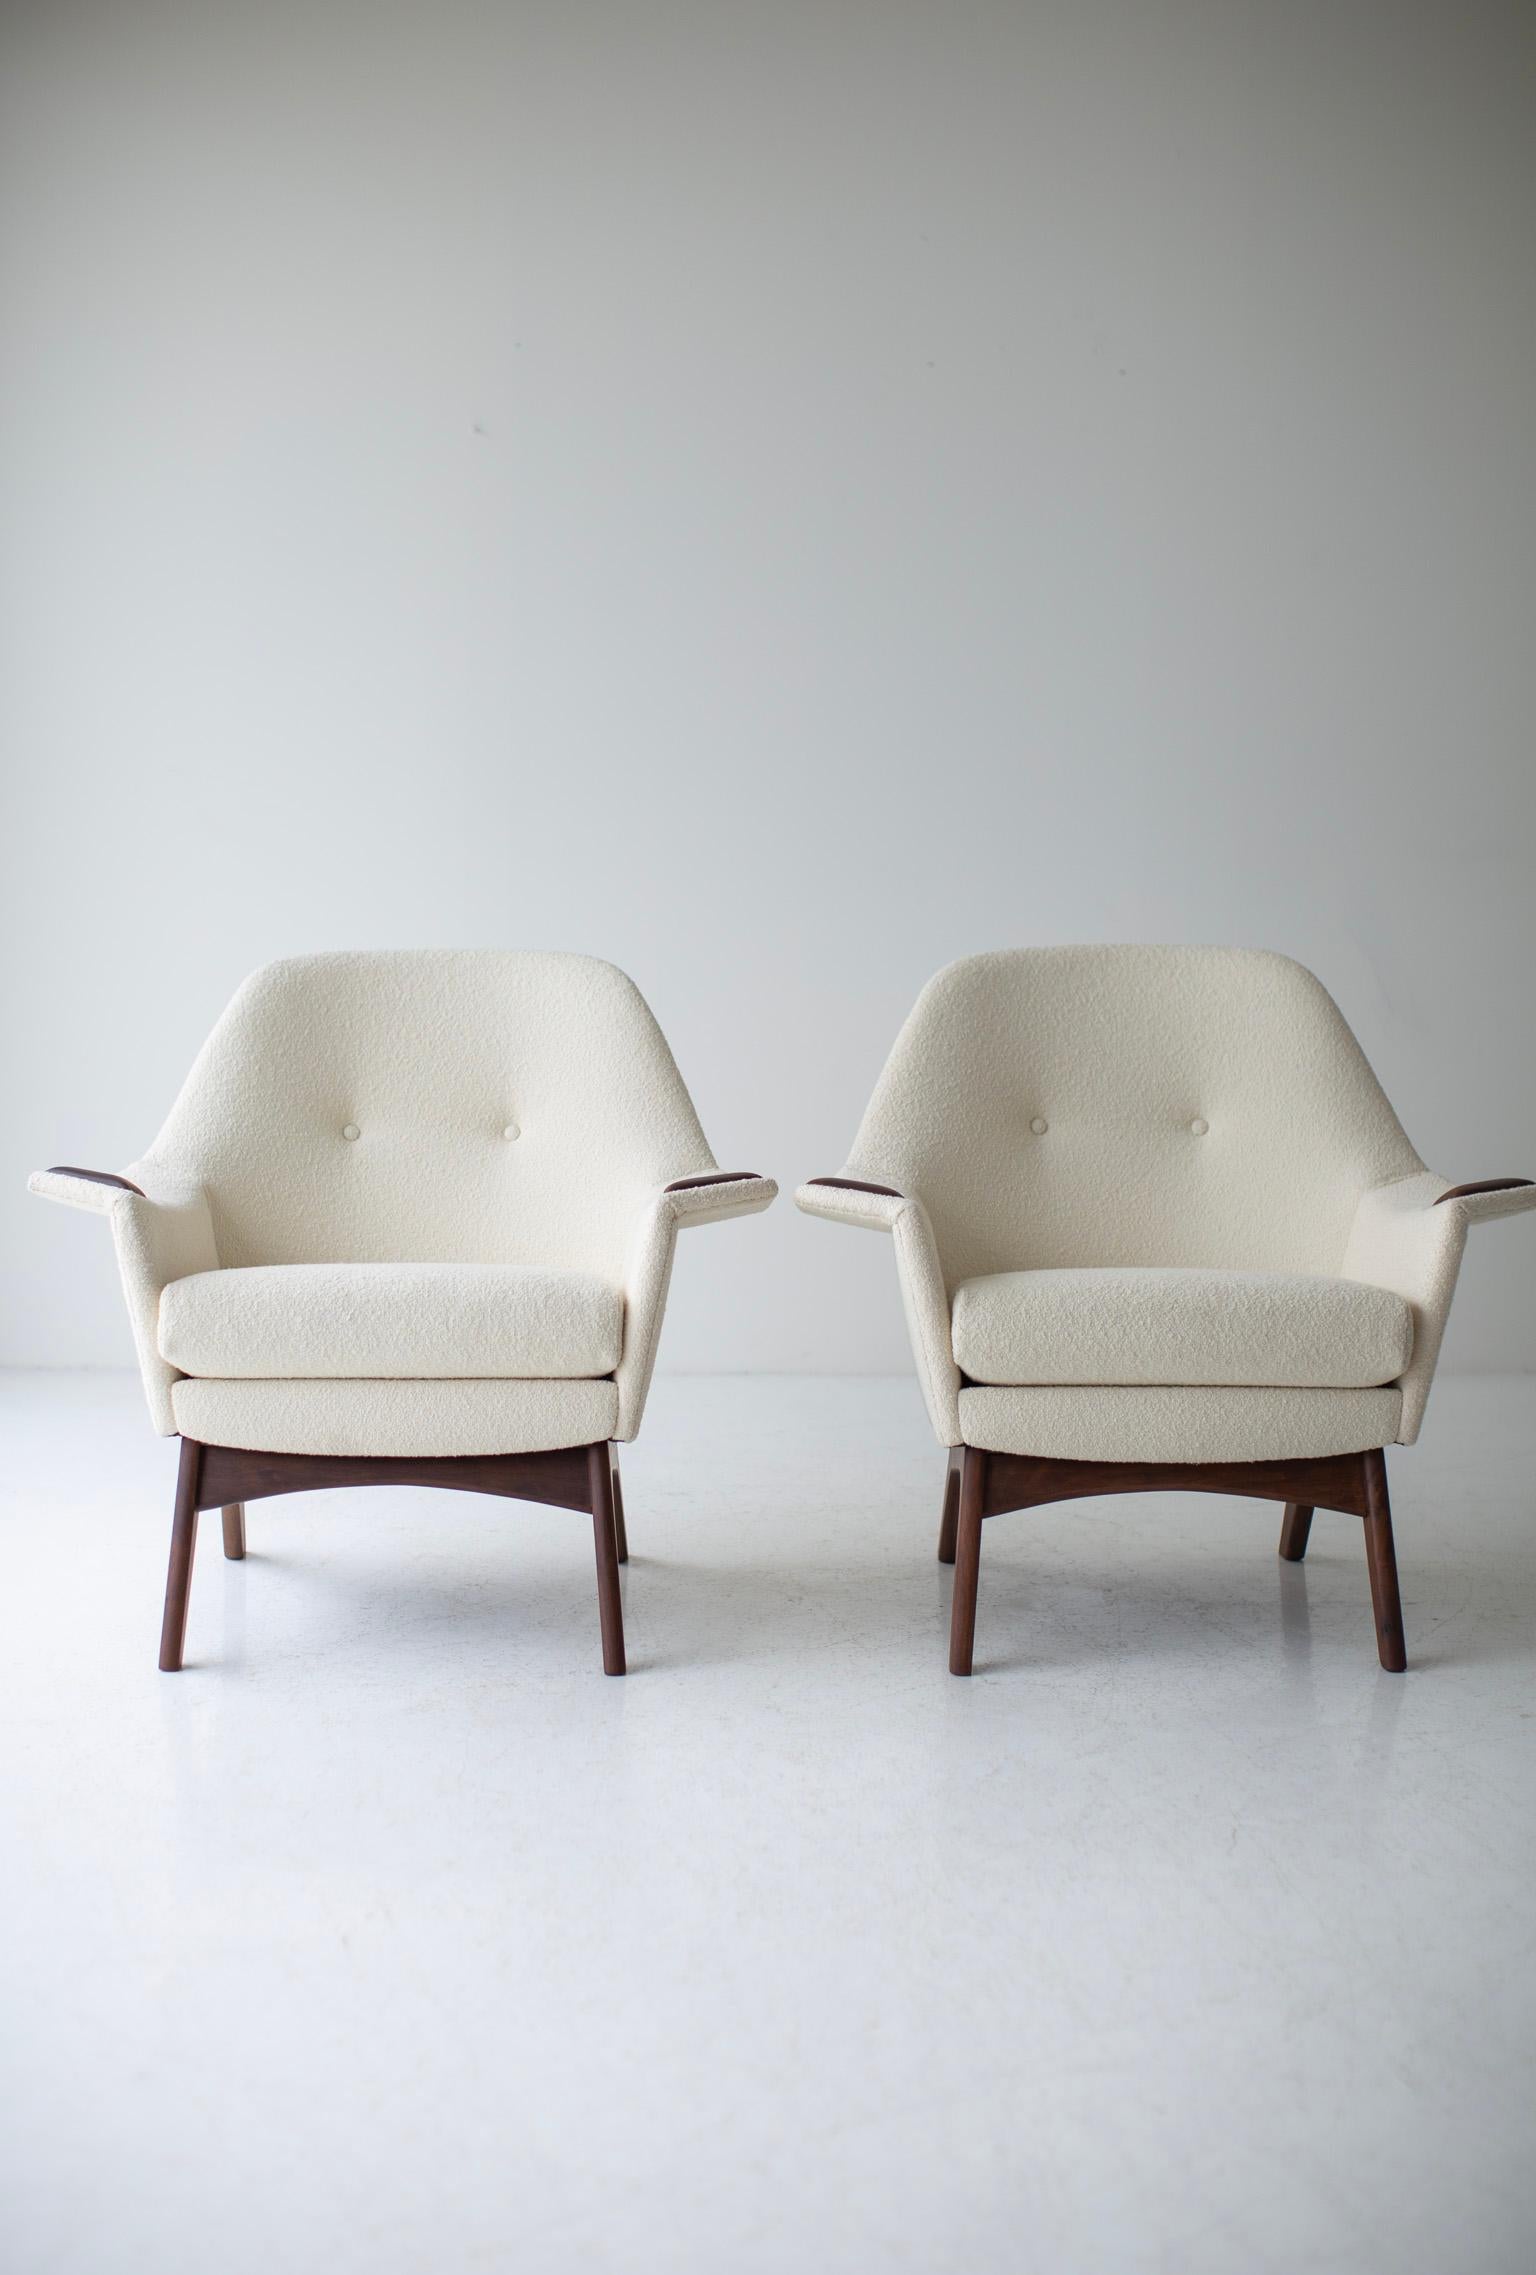 Swanky Adrian Pearsall Lounge Chairs for Craft Associates Inc in Knoll Boucle 3